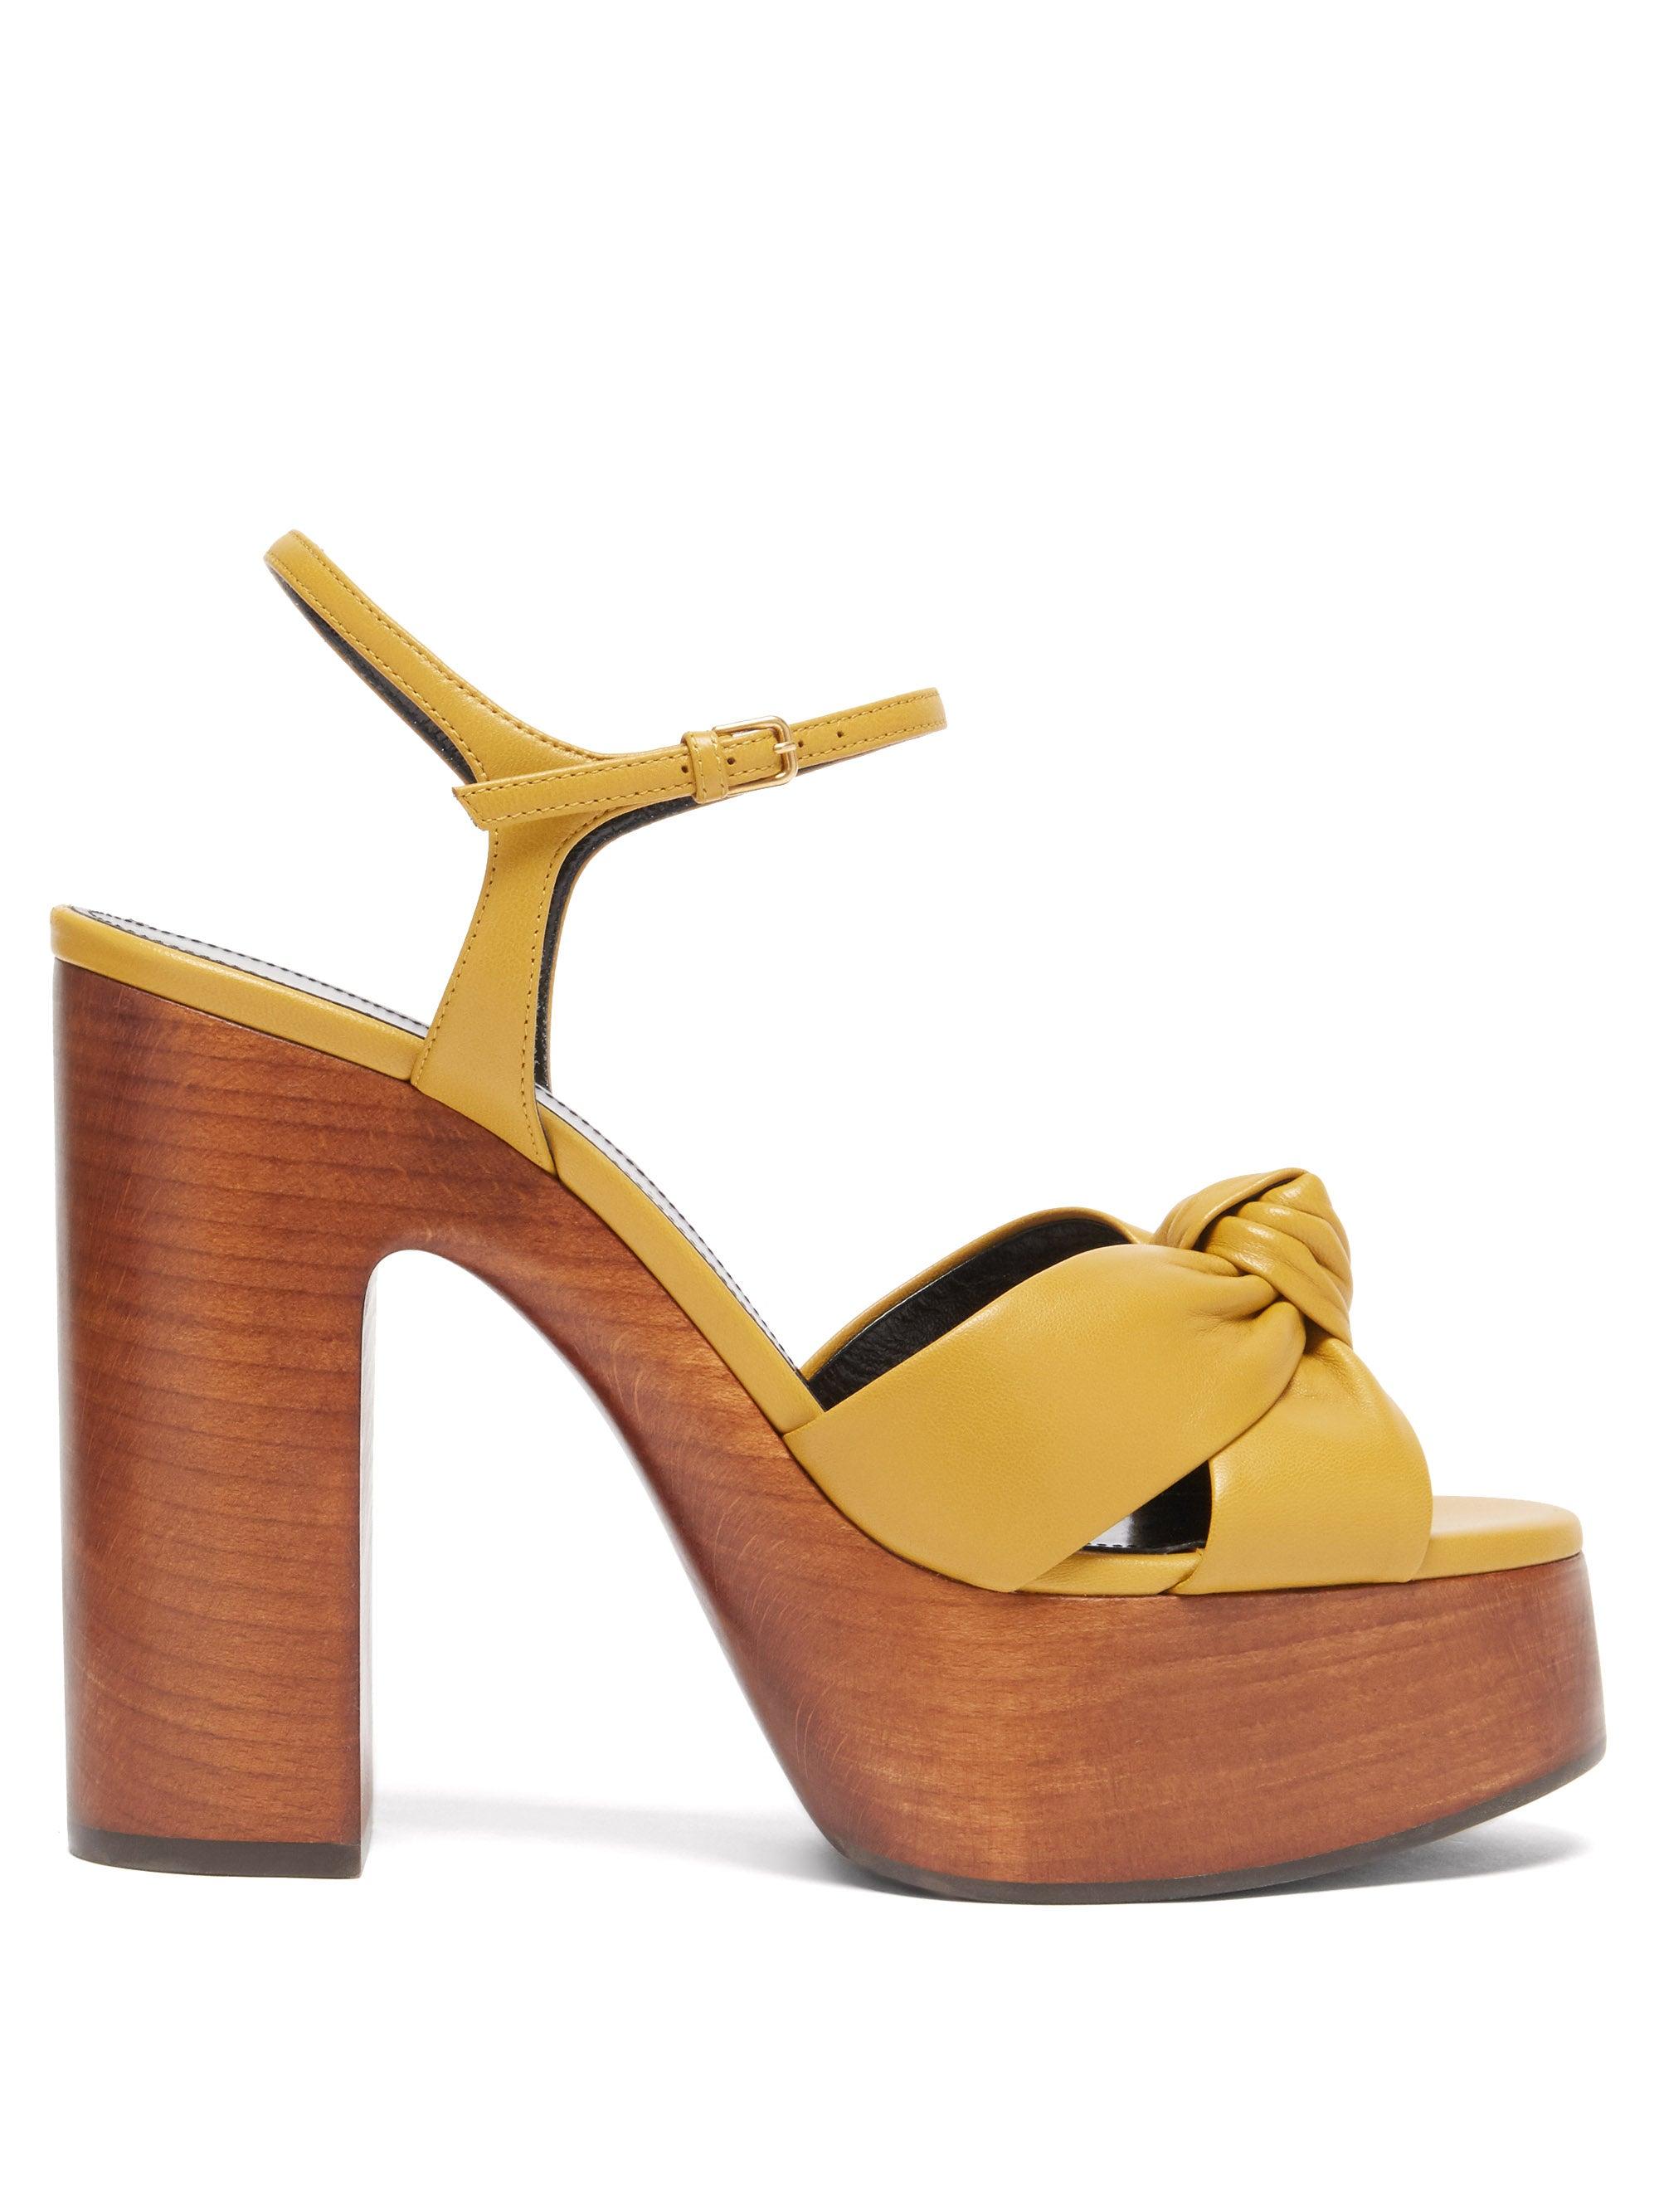 Saint Laurent Bianca Knotted Leather And Wood Platform Sandals in Yellow |  Lyst